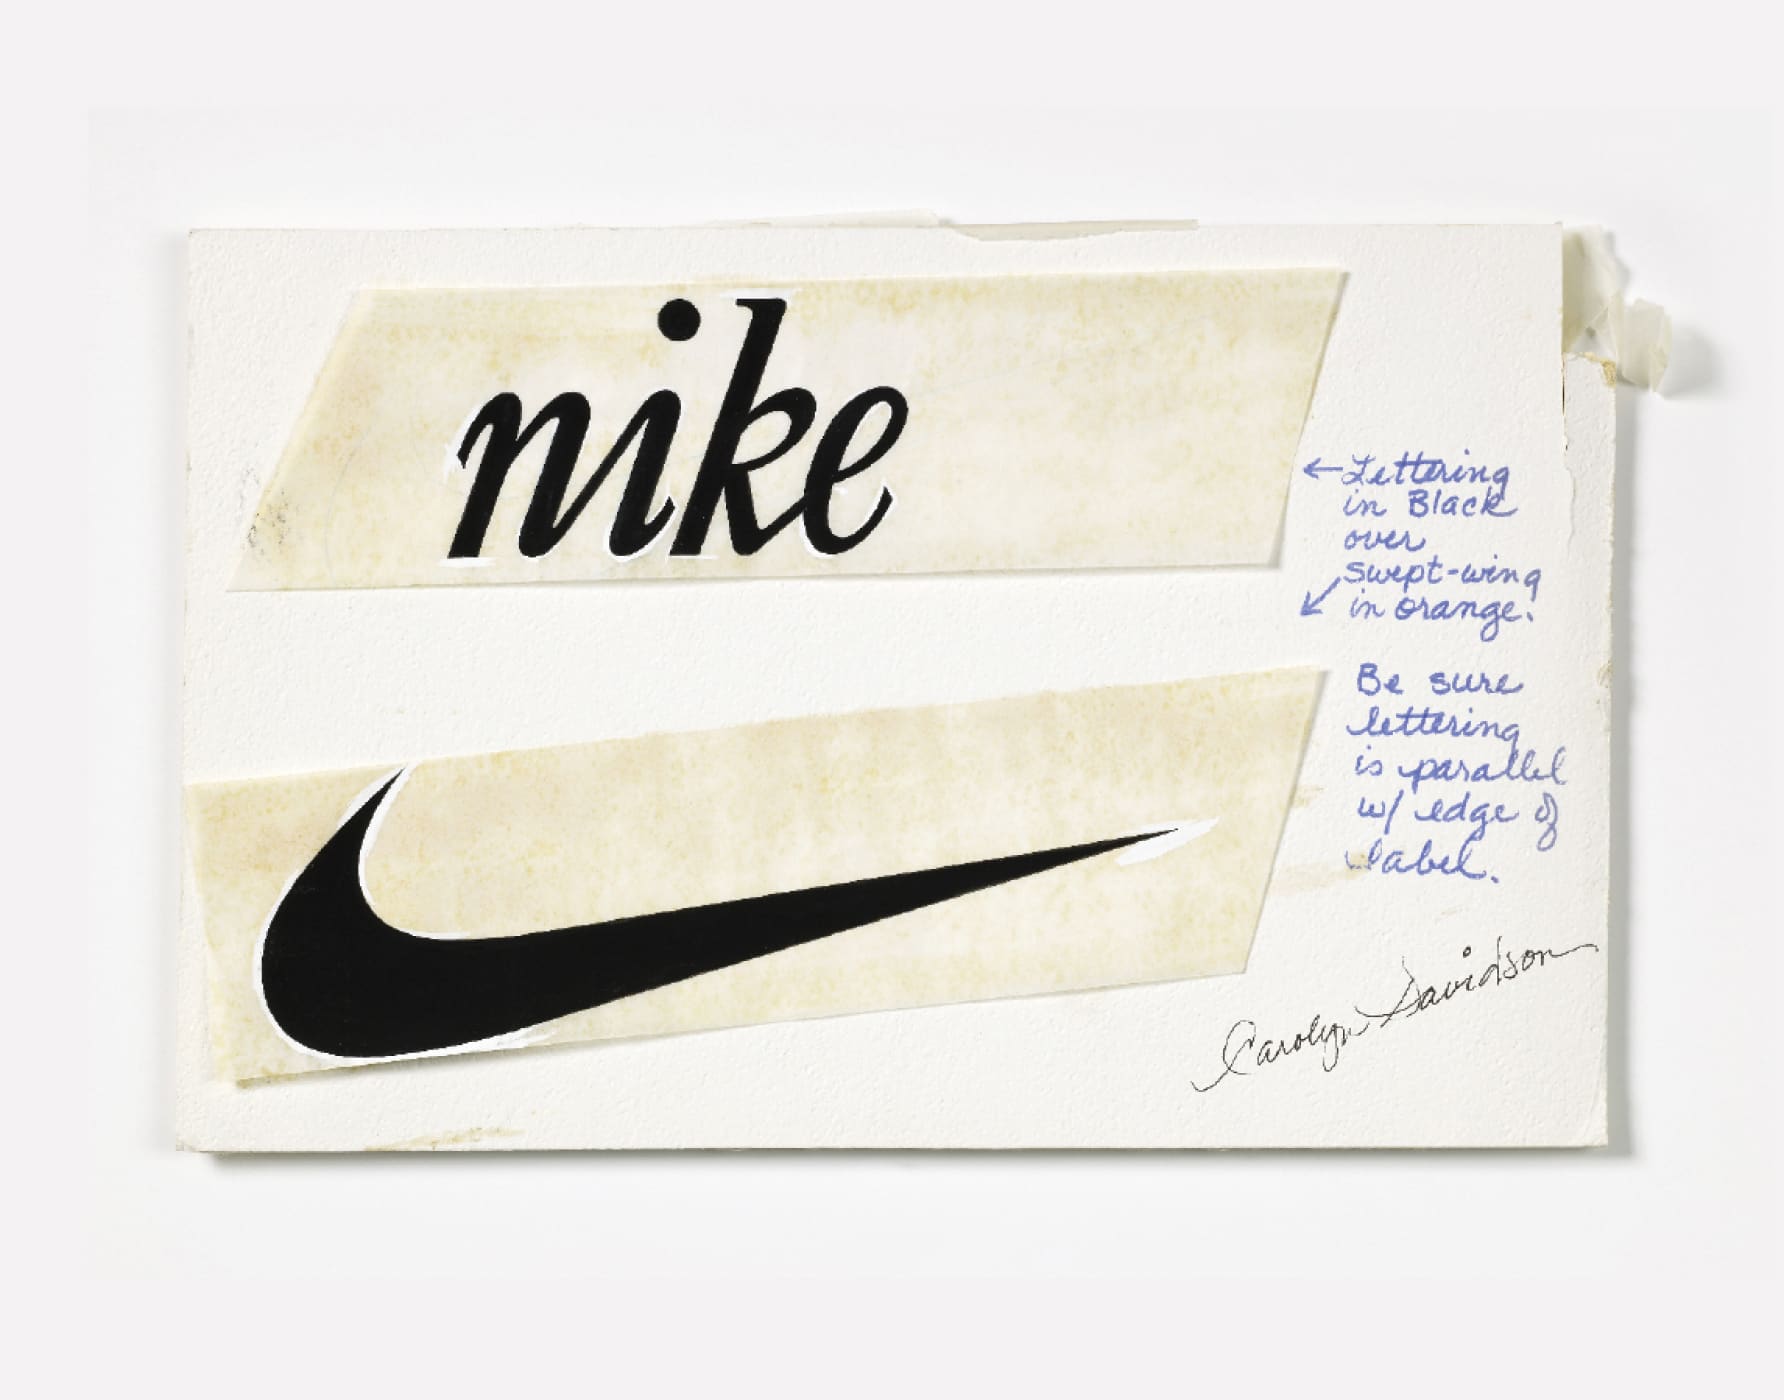 Did you know that Nike's iconic “Swoosh” logo was designed by a